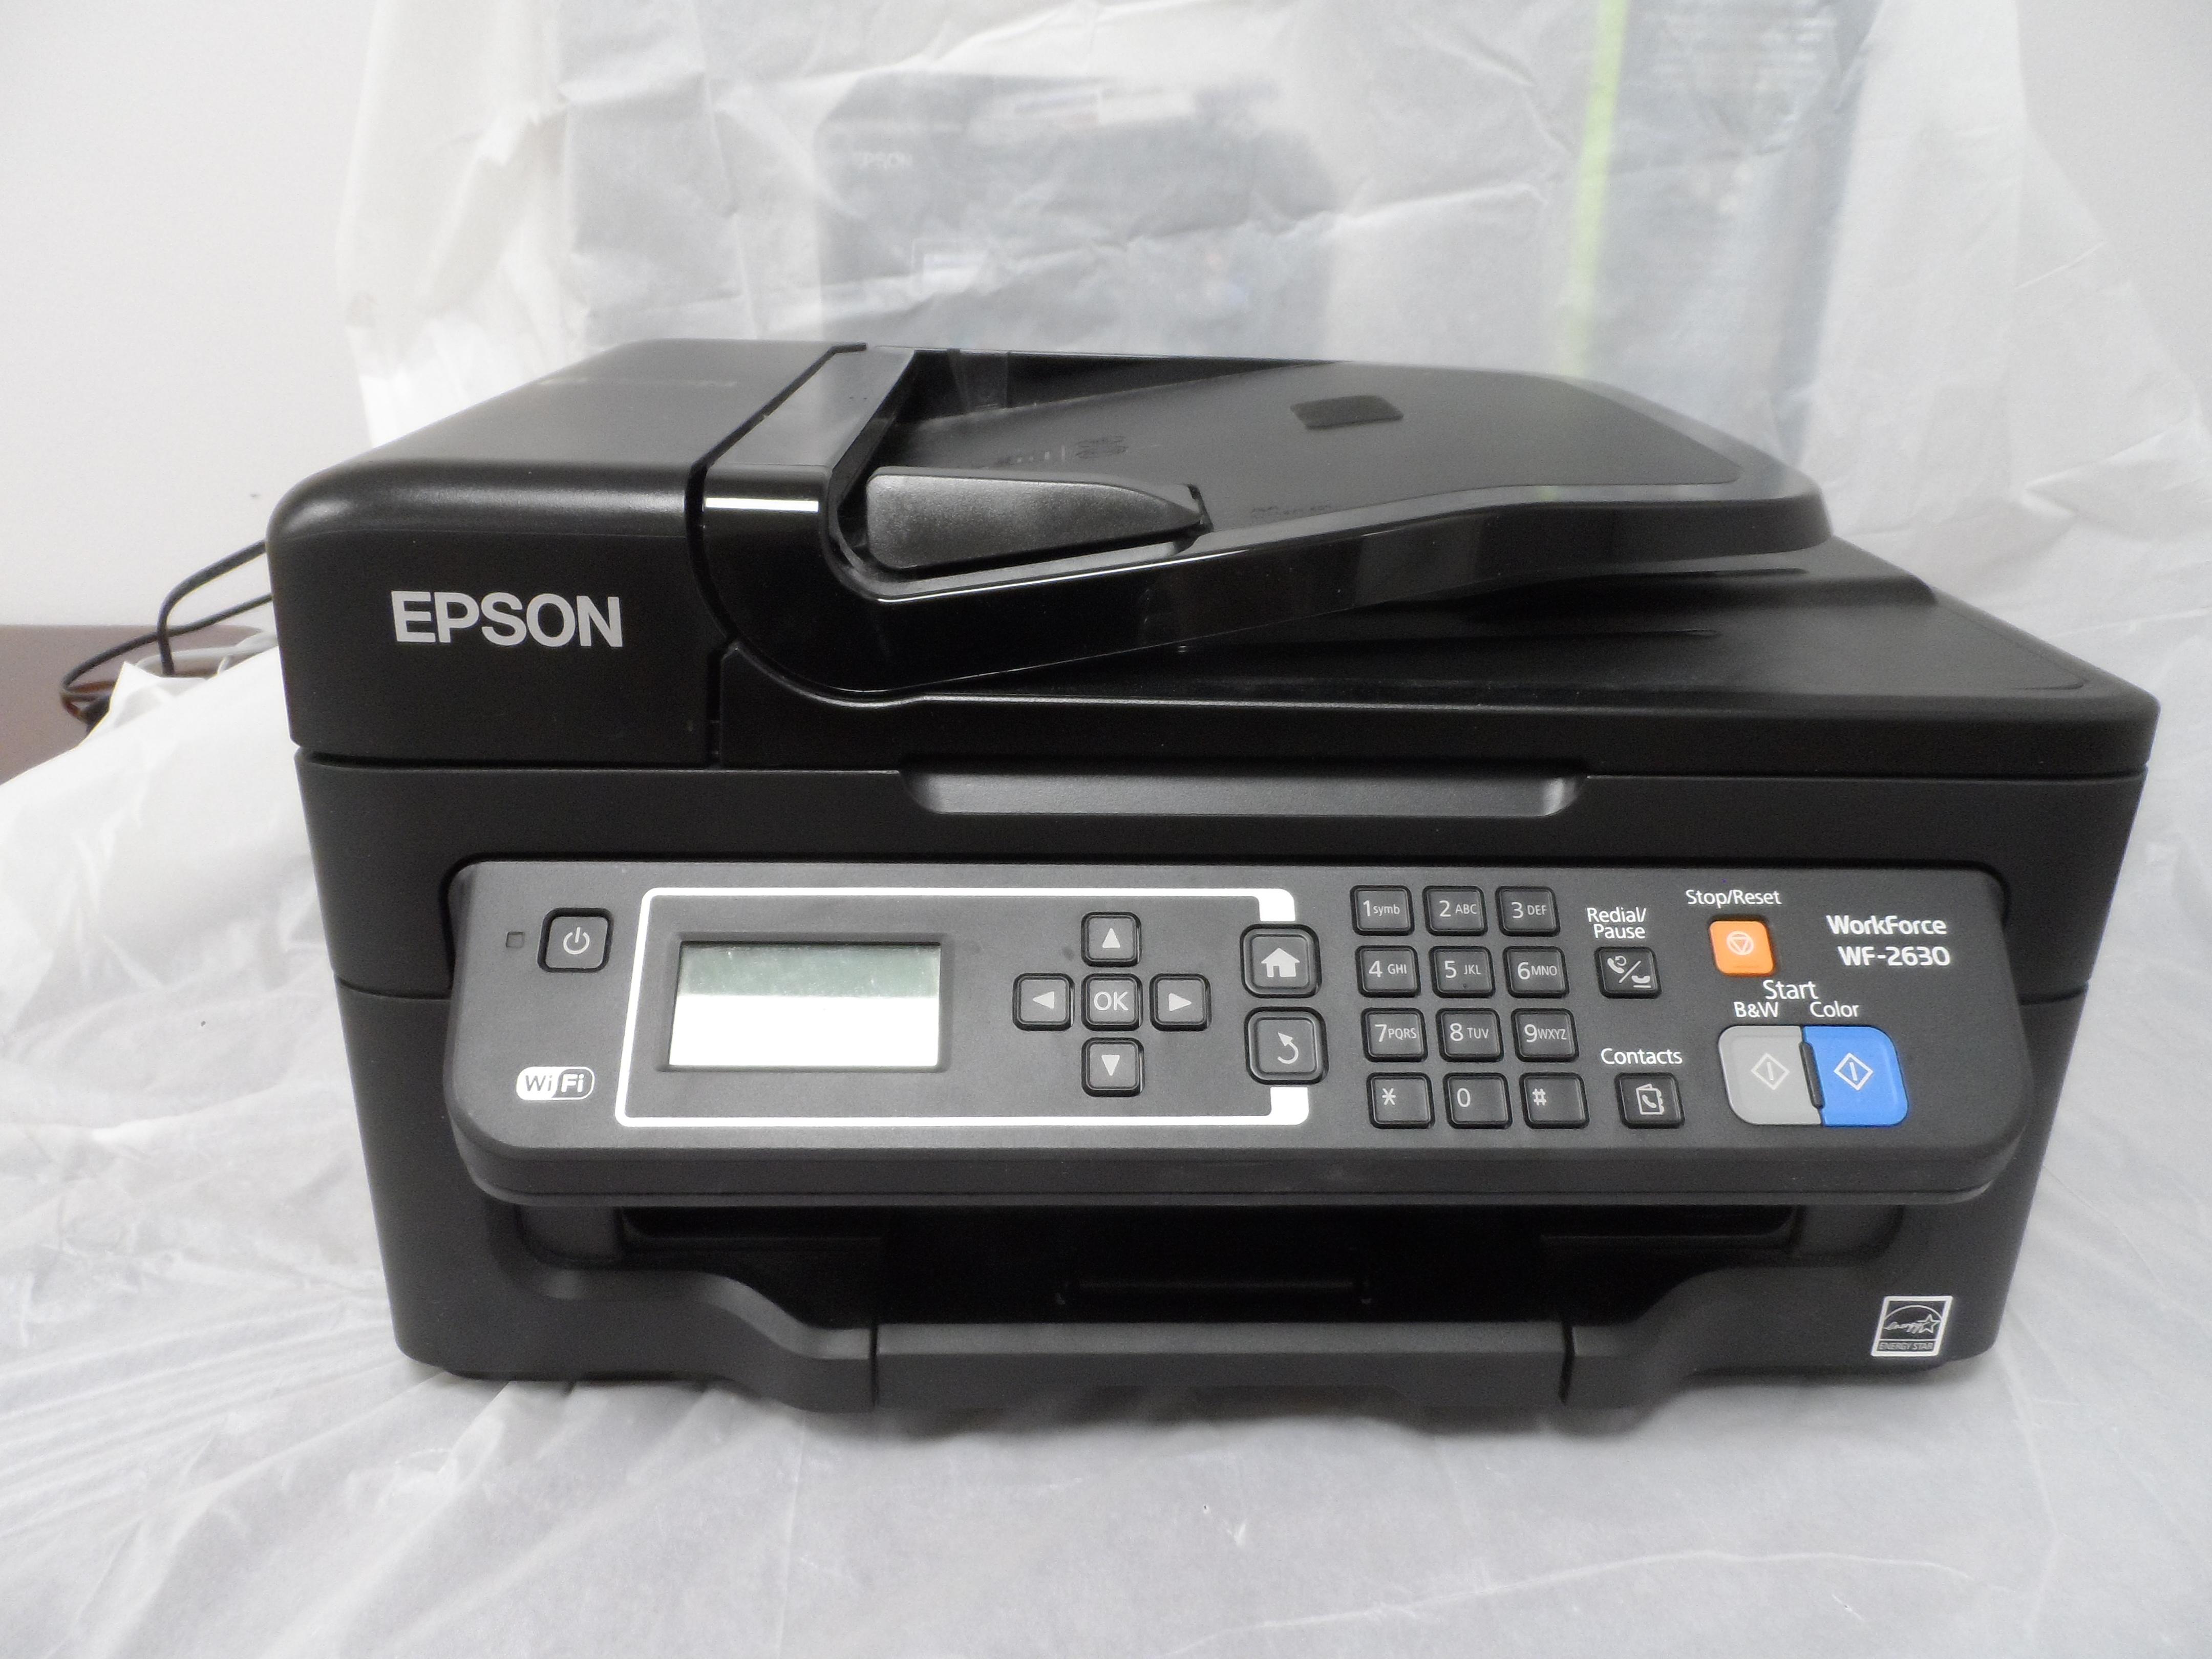 Epson Workforce Wf 2630 Printer Bargain In Tf3 Madeley For £2000 For Sale Shpock 3247